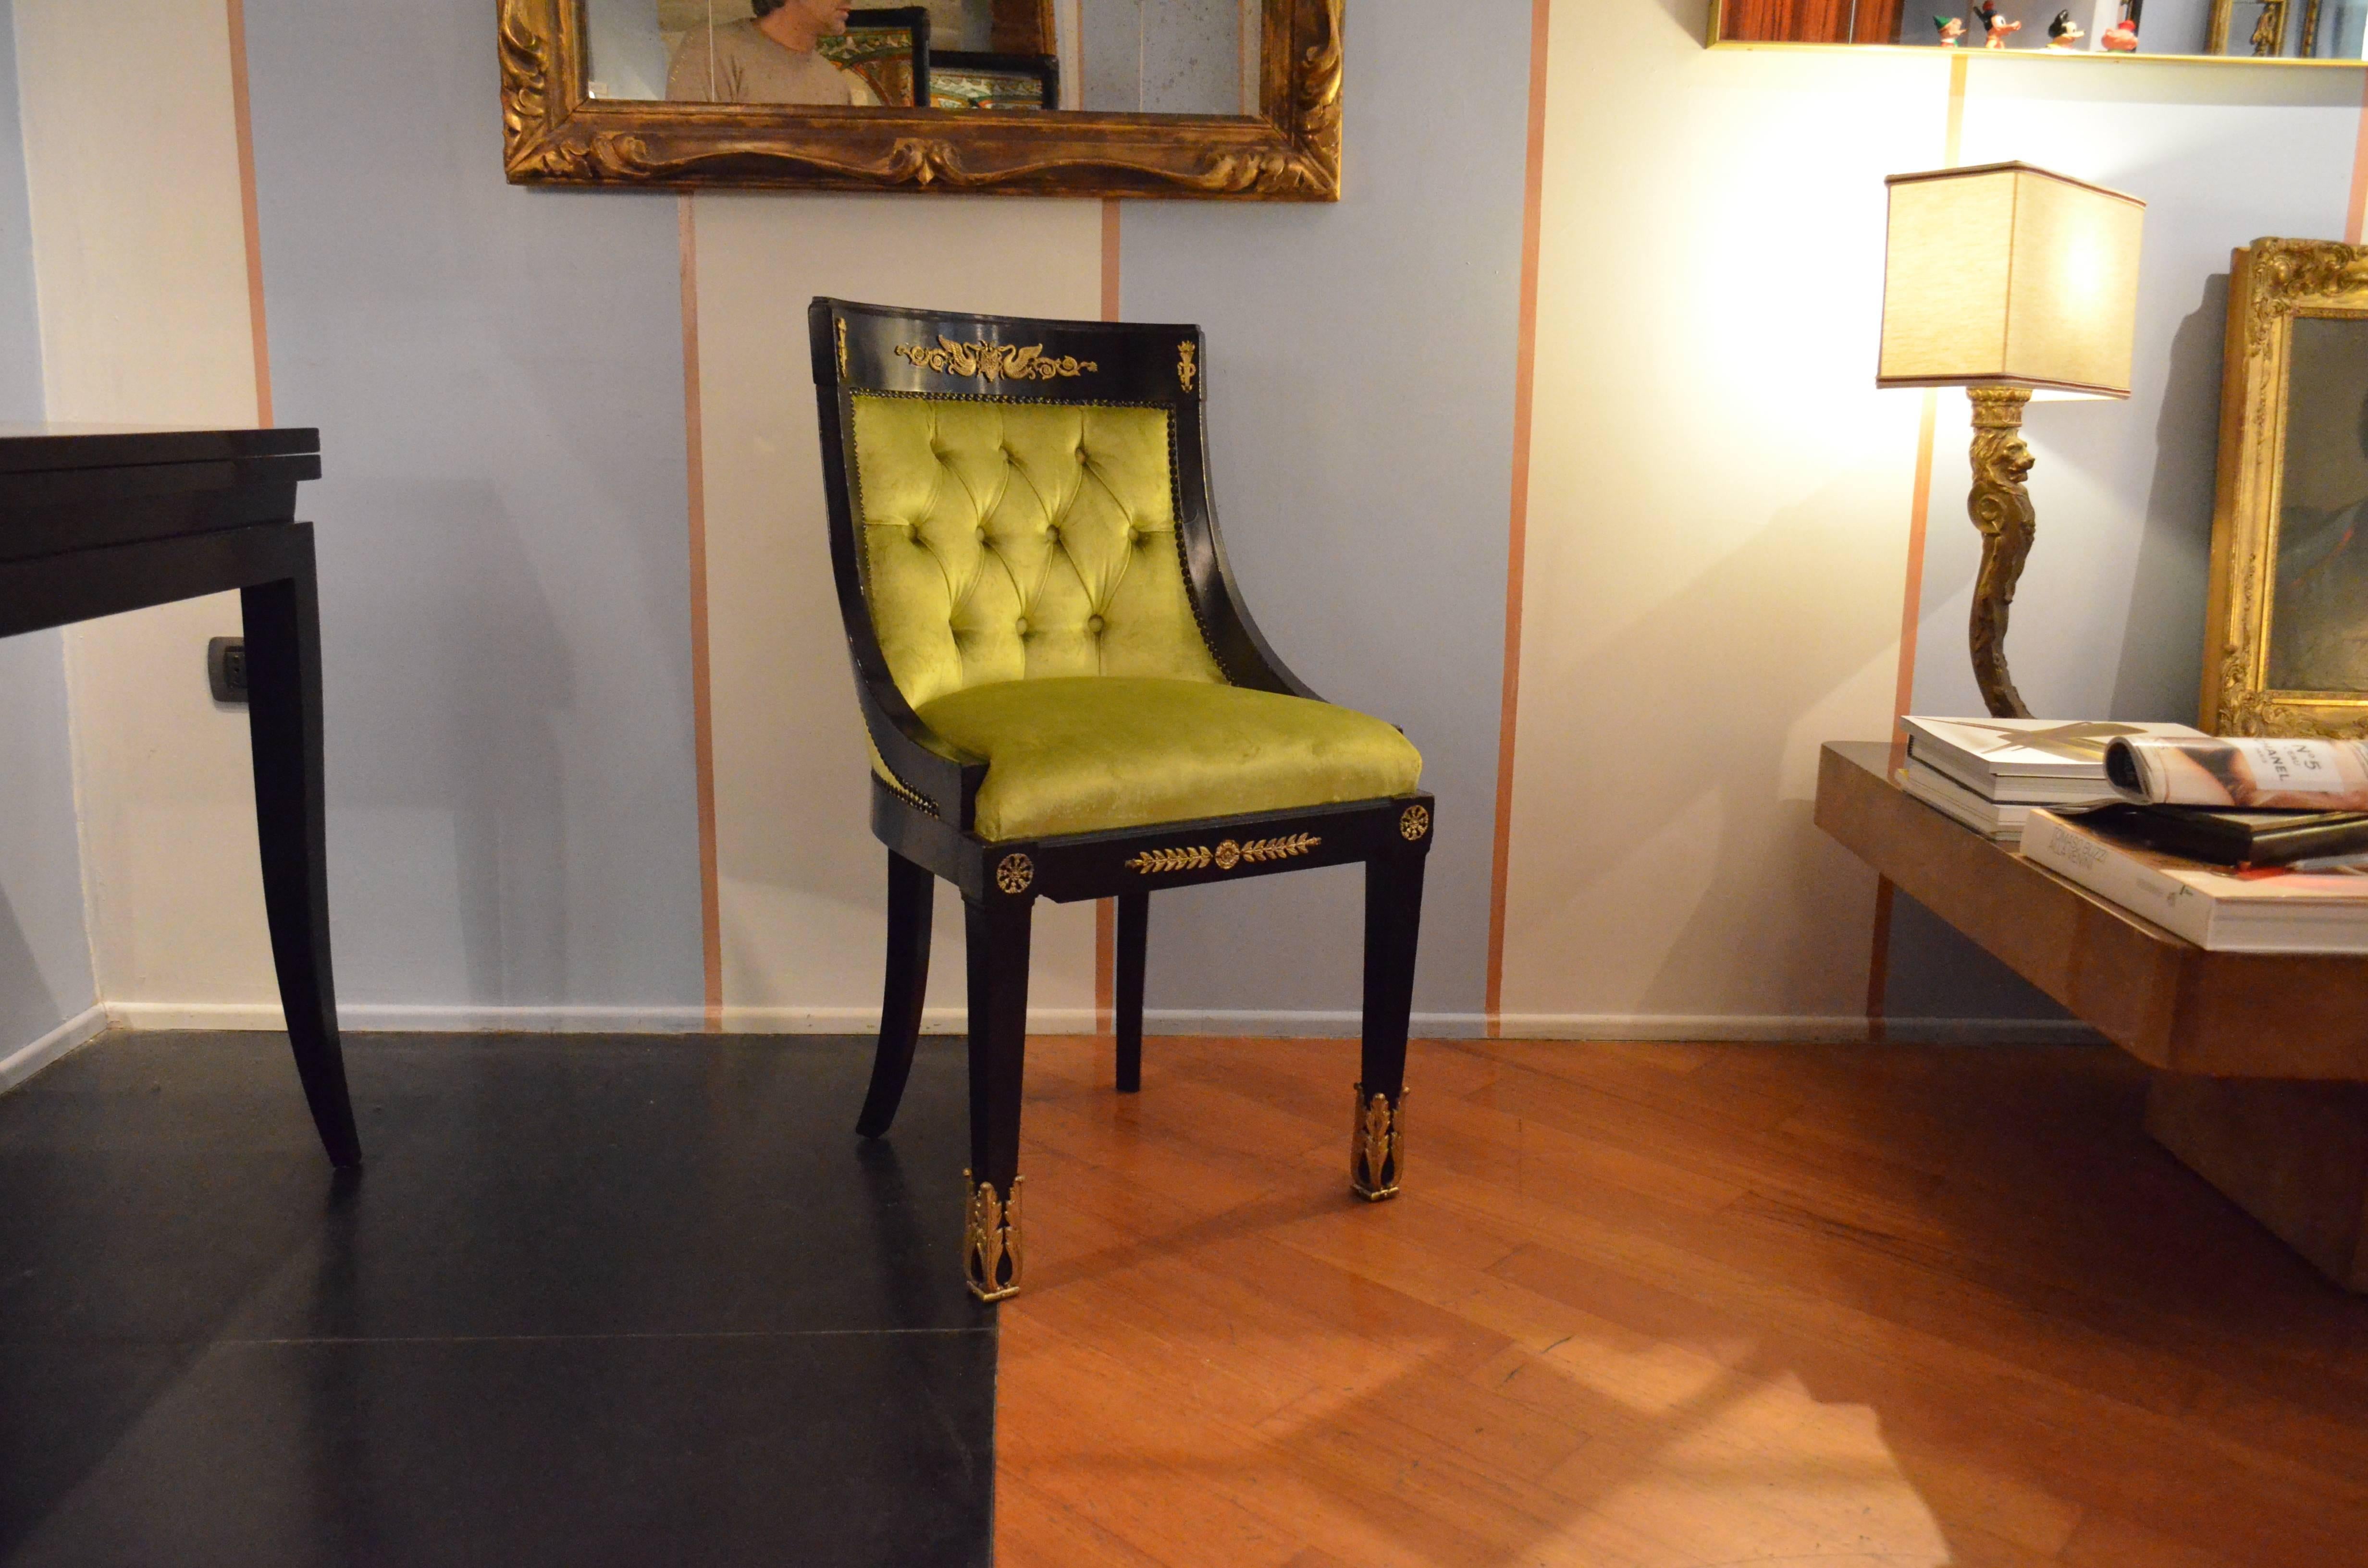 A set of six chairs with original and signed bronzes. The chairs come from France from the period of Napoleon III. They are made in mahogany ebonized wood featuring wonderful bronzes and friezes. Very uncommonly the bronzes are signed as shown in